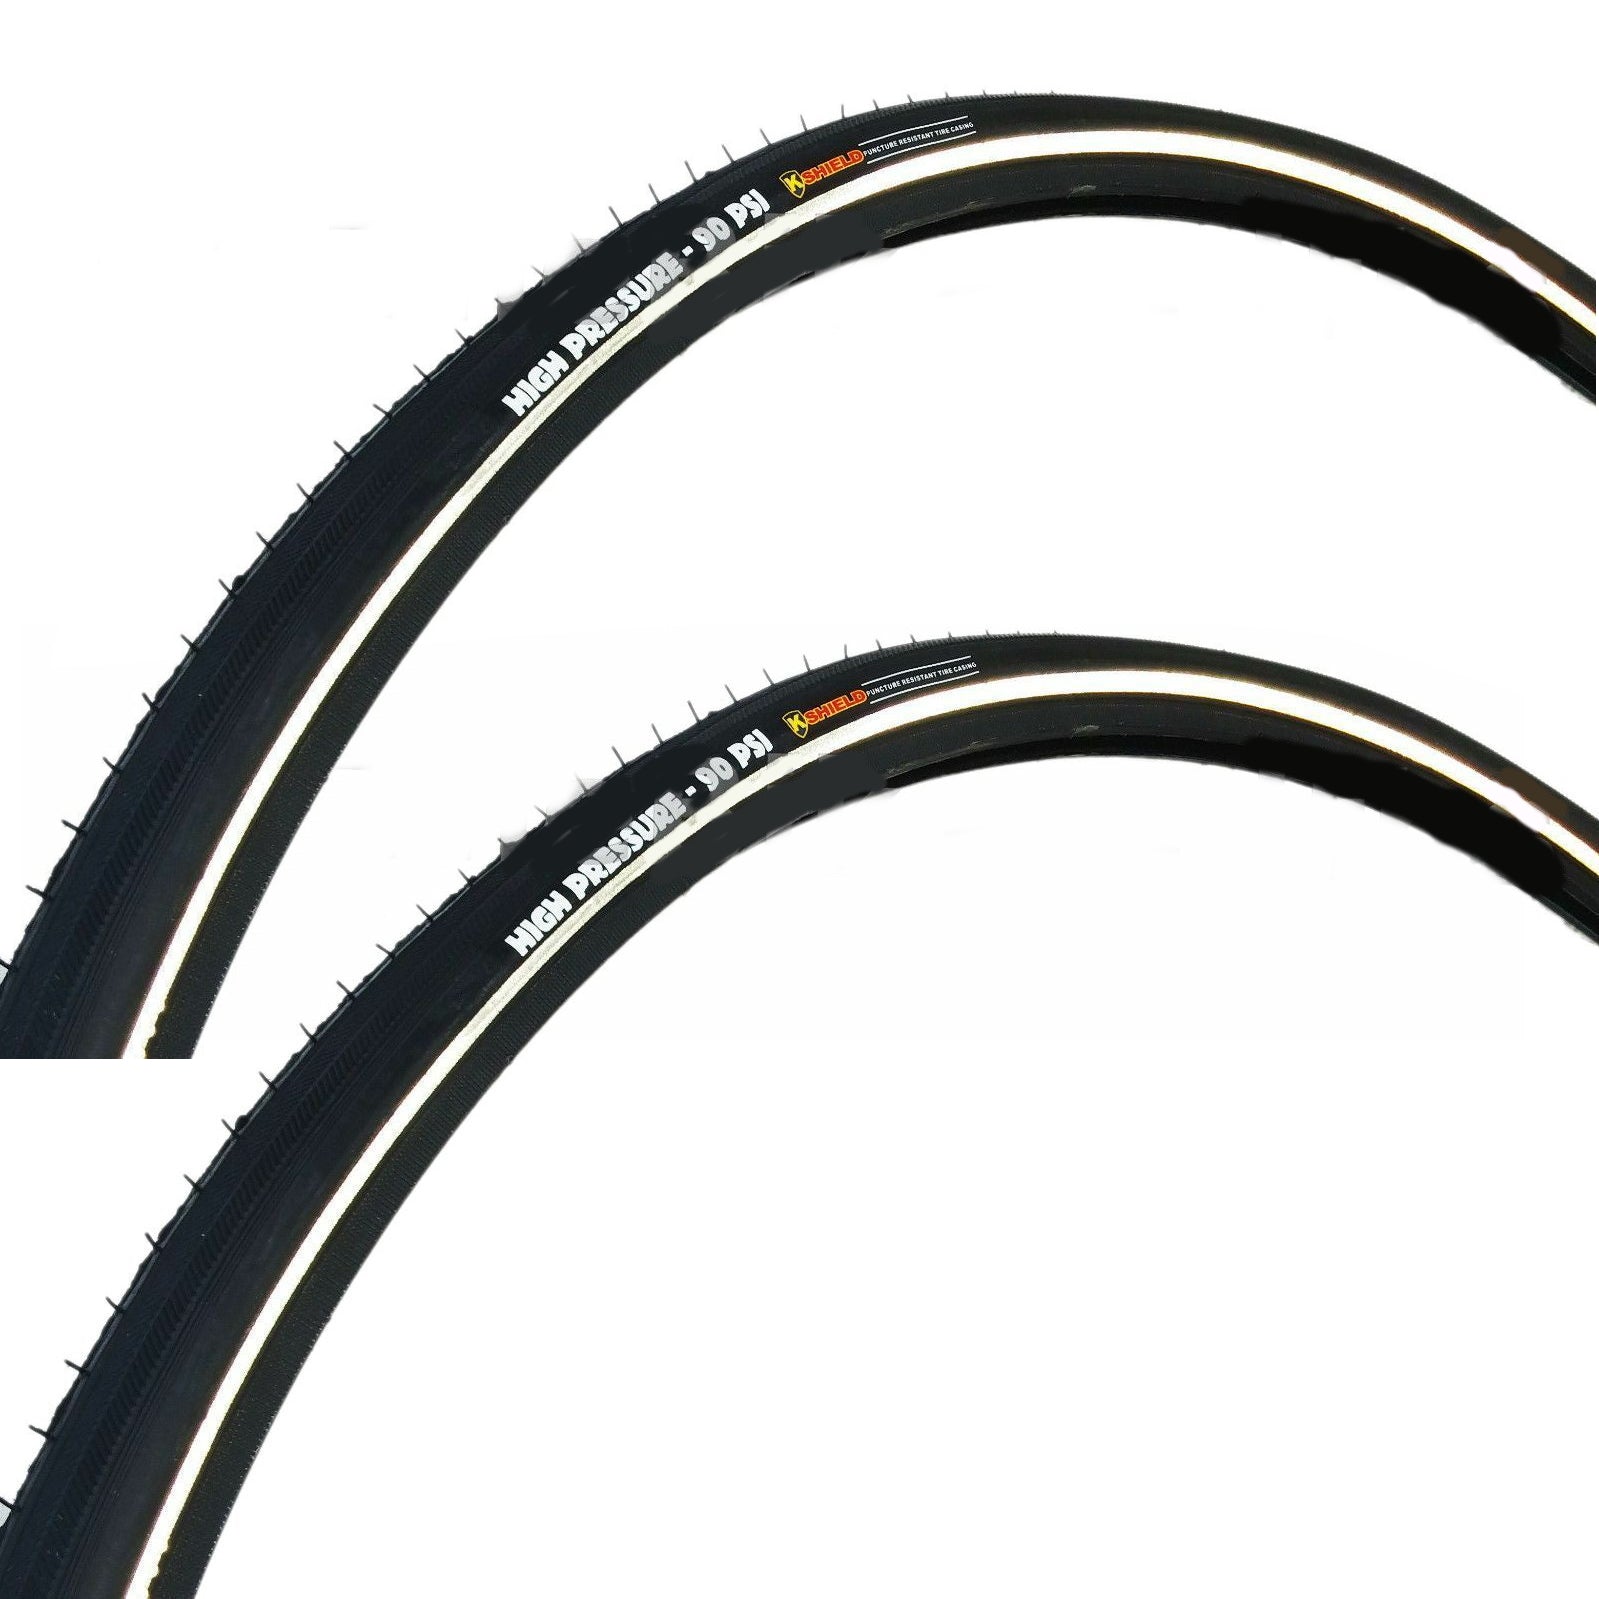 Kenda K35 27x1-1/4 Tire with K-Shield Puncture Protection and Reflective Sidewall - The Bikesmiths